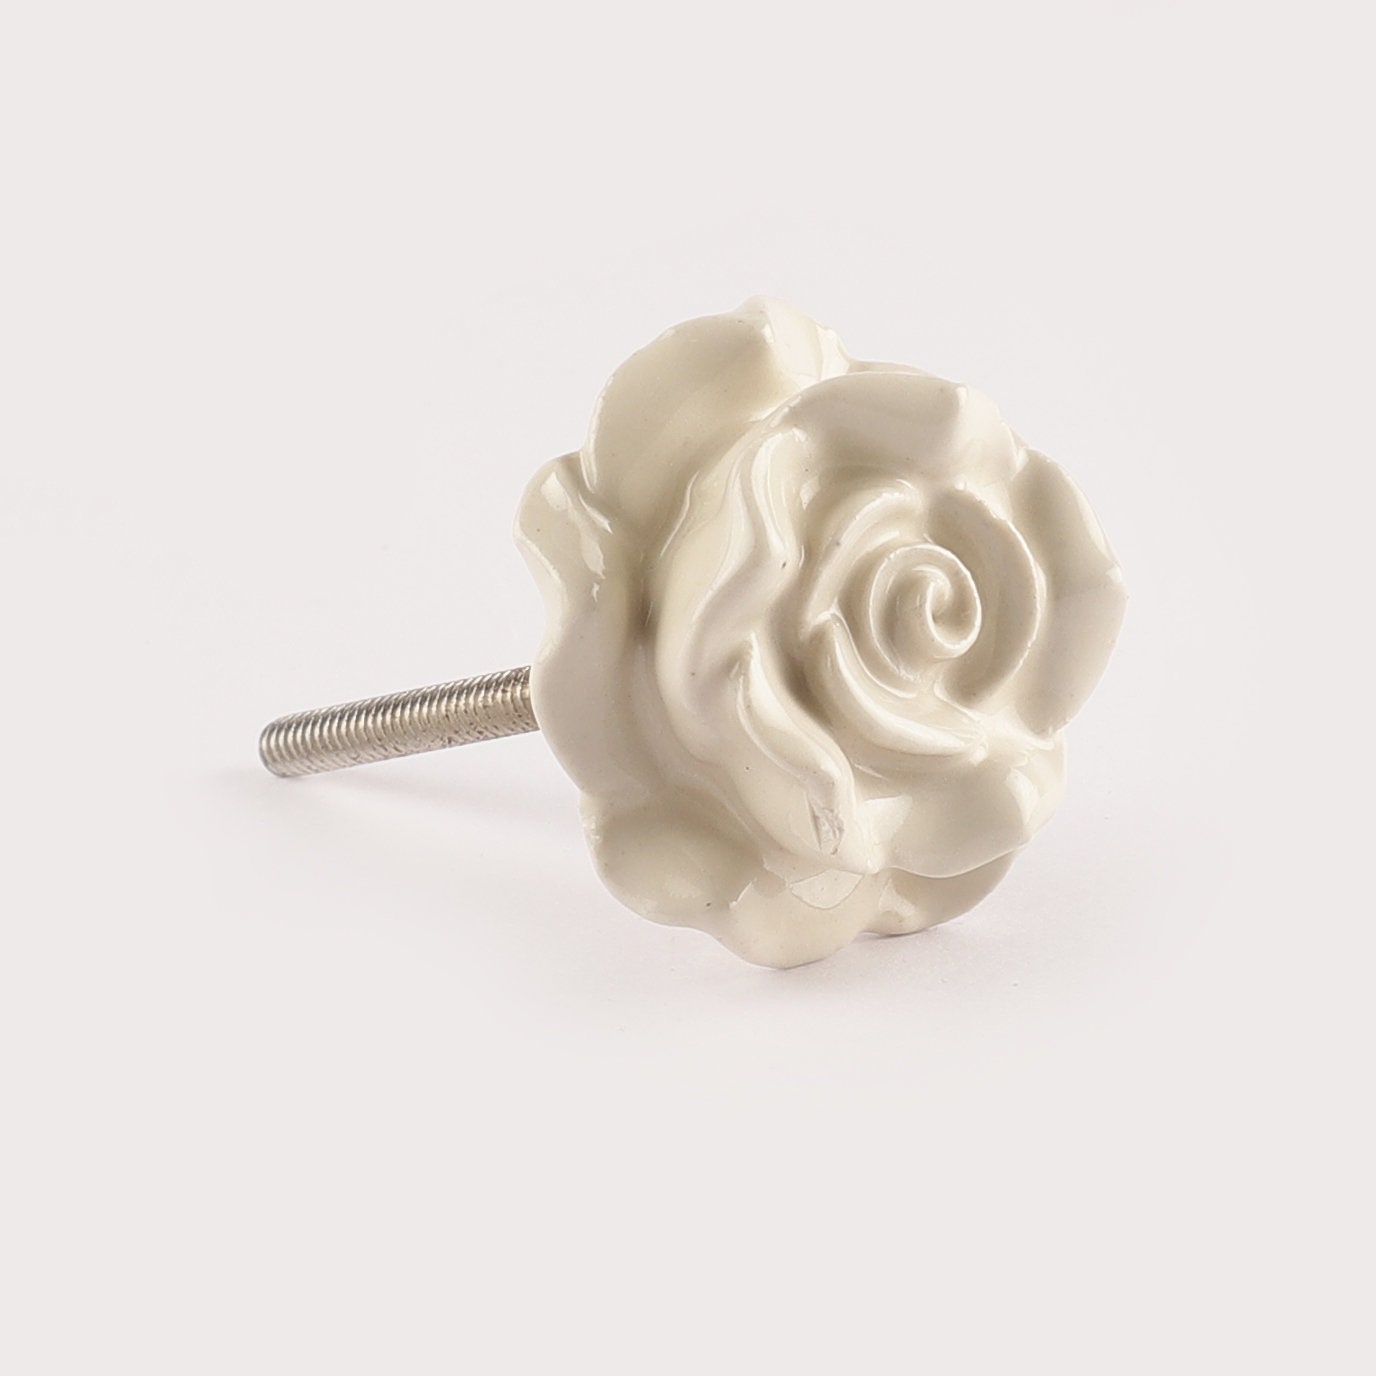 White with Gold, Rose Style Ceramic Pull Knobs (C17)